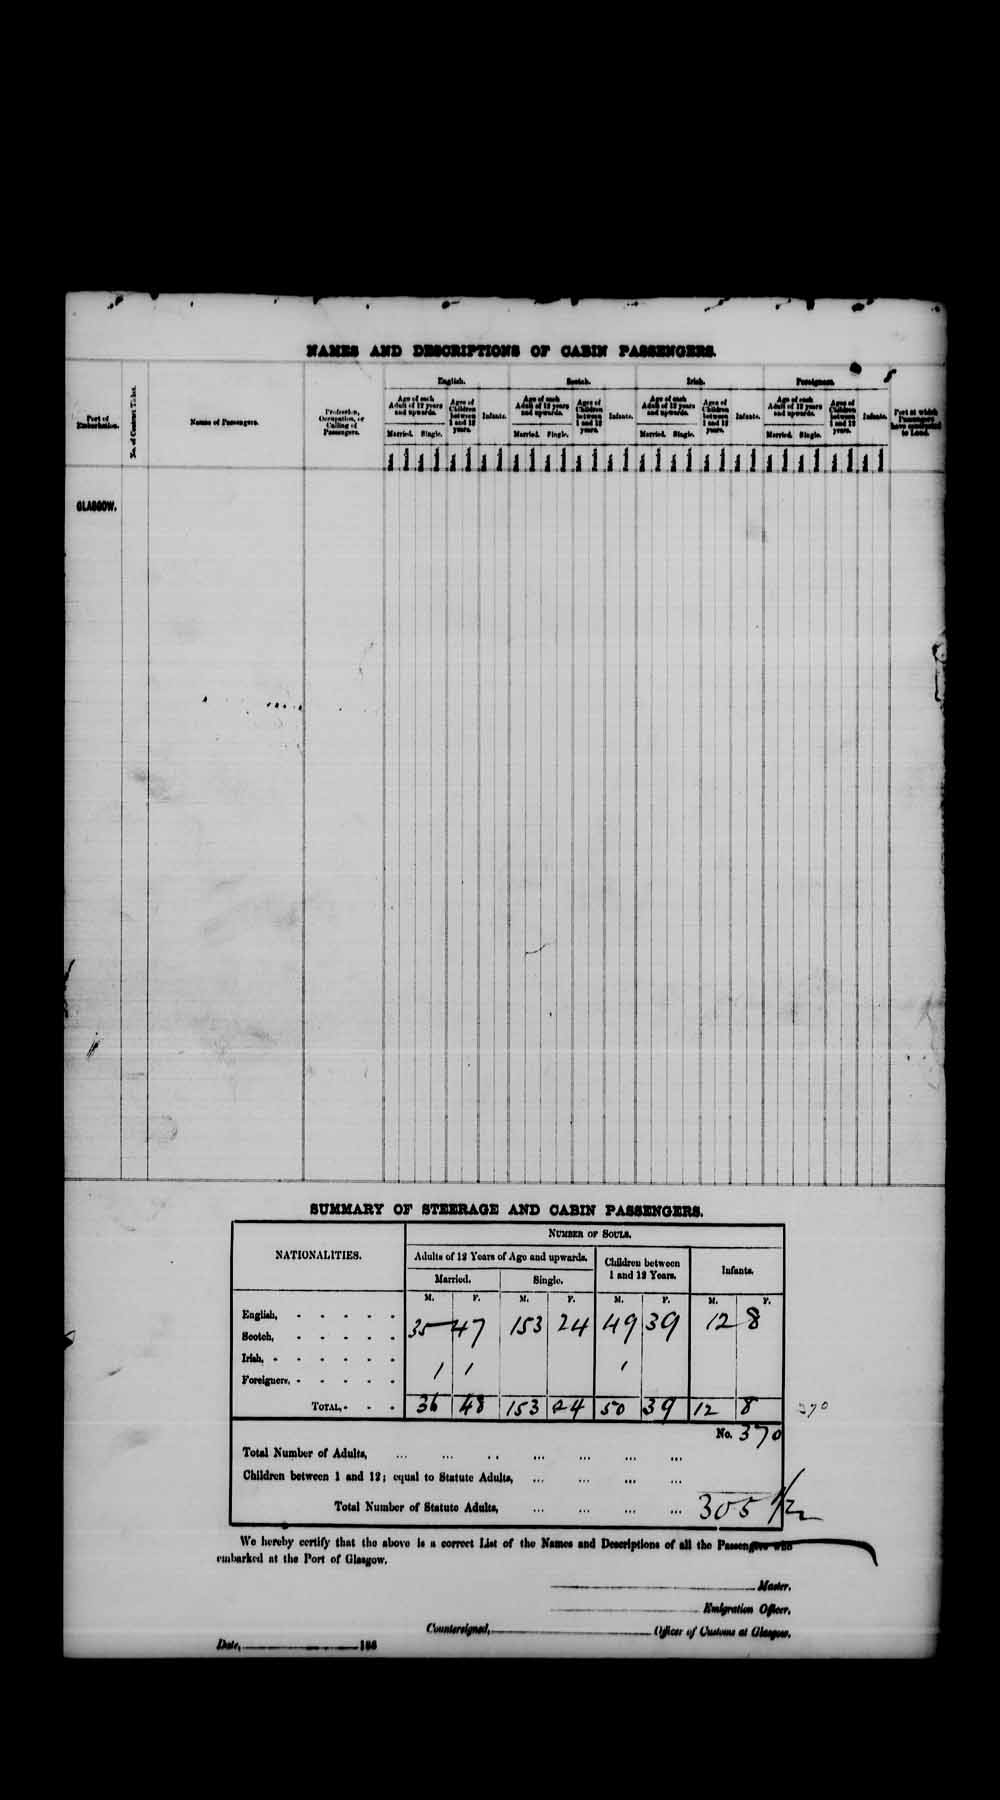 Digitized page of Passenger Lists for Image No.: e003542668